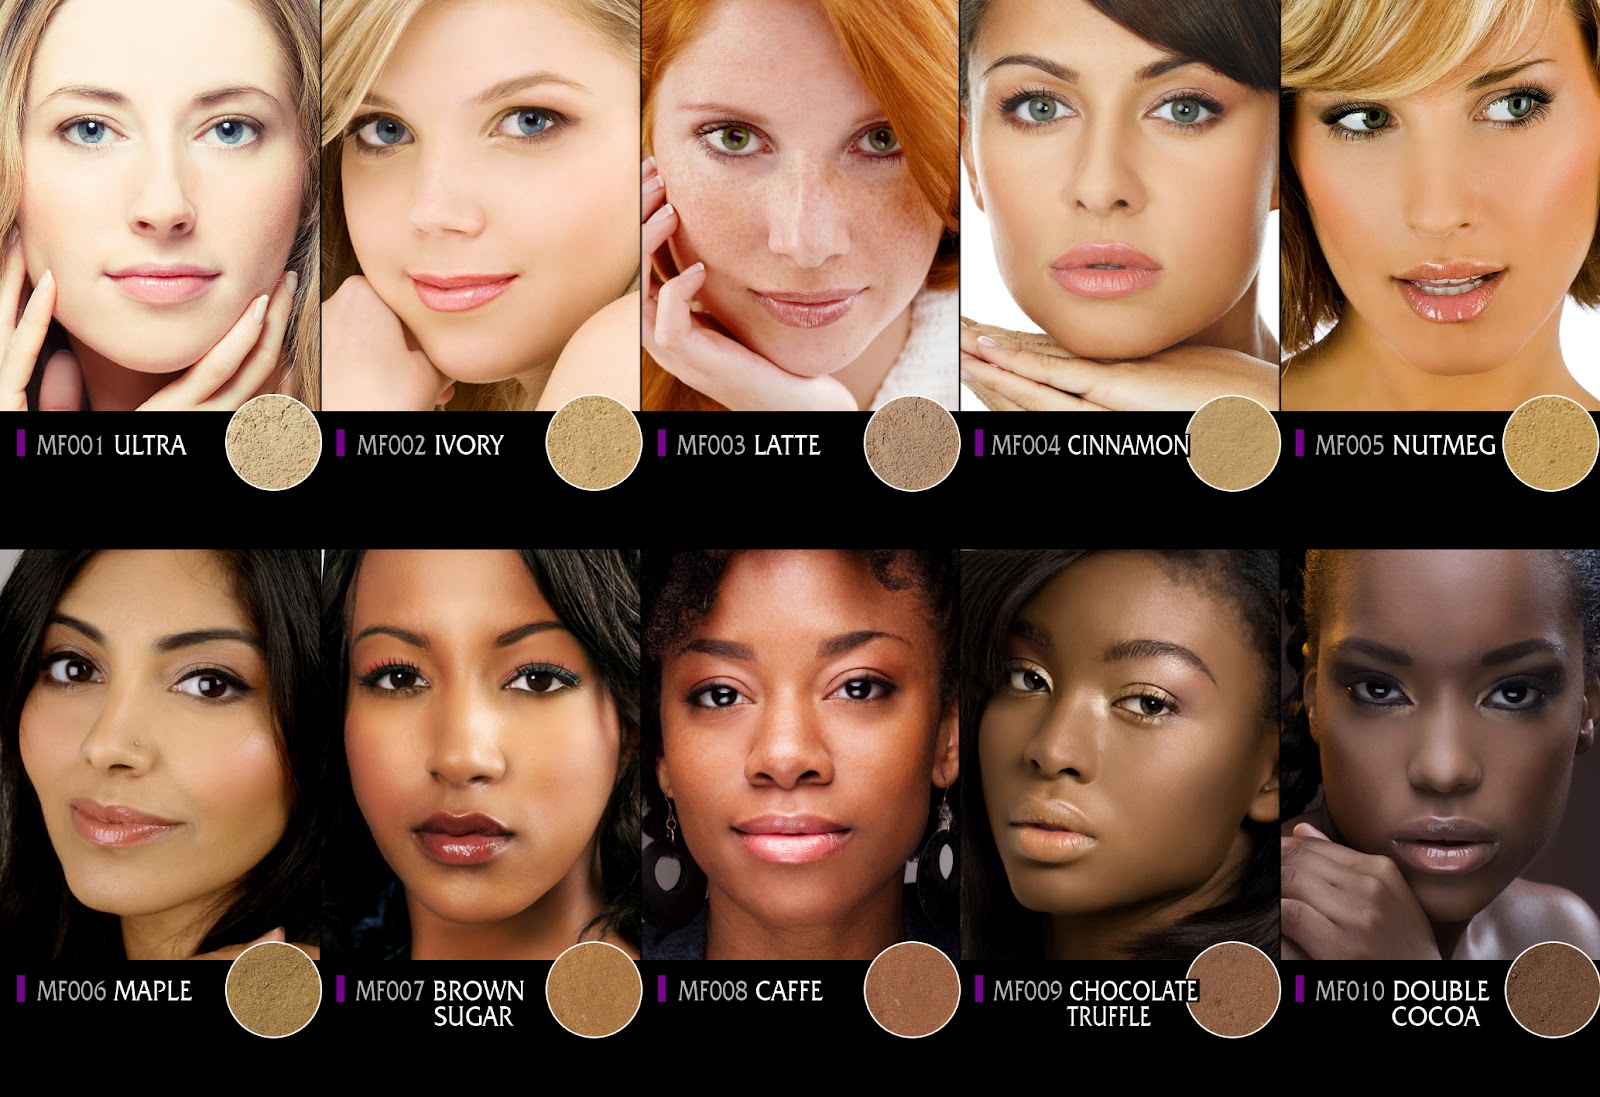 10. Blue Base Hair Color: How to Choose the Right Shade for Your Skin Tone - wide 3